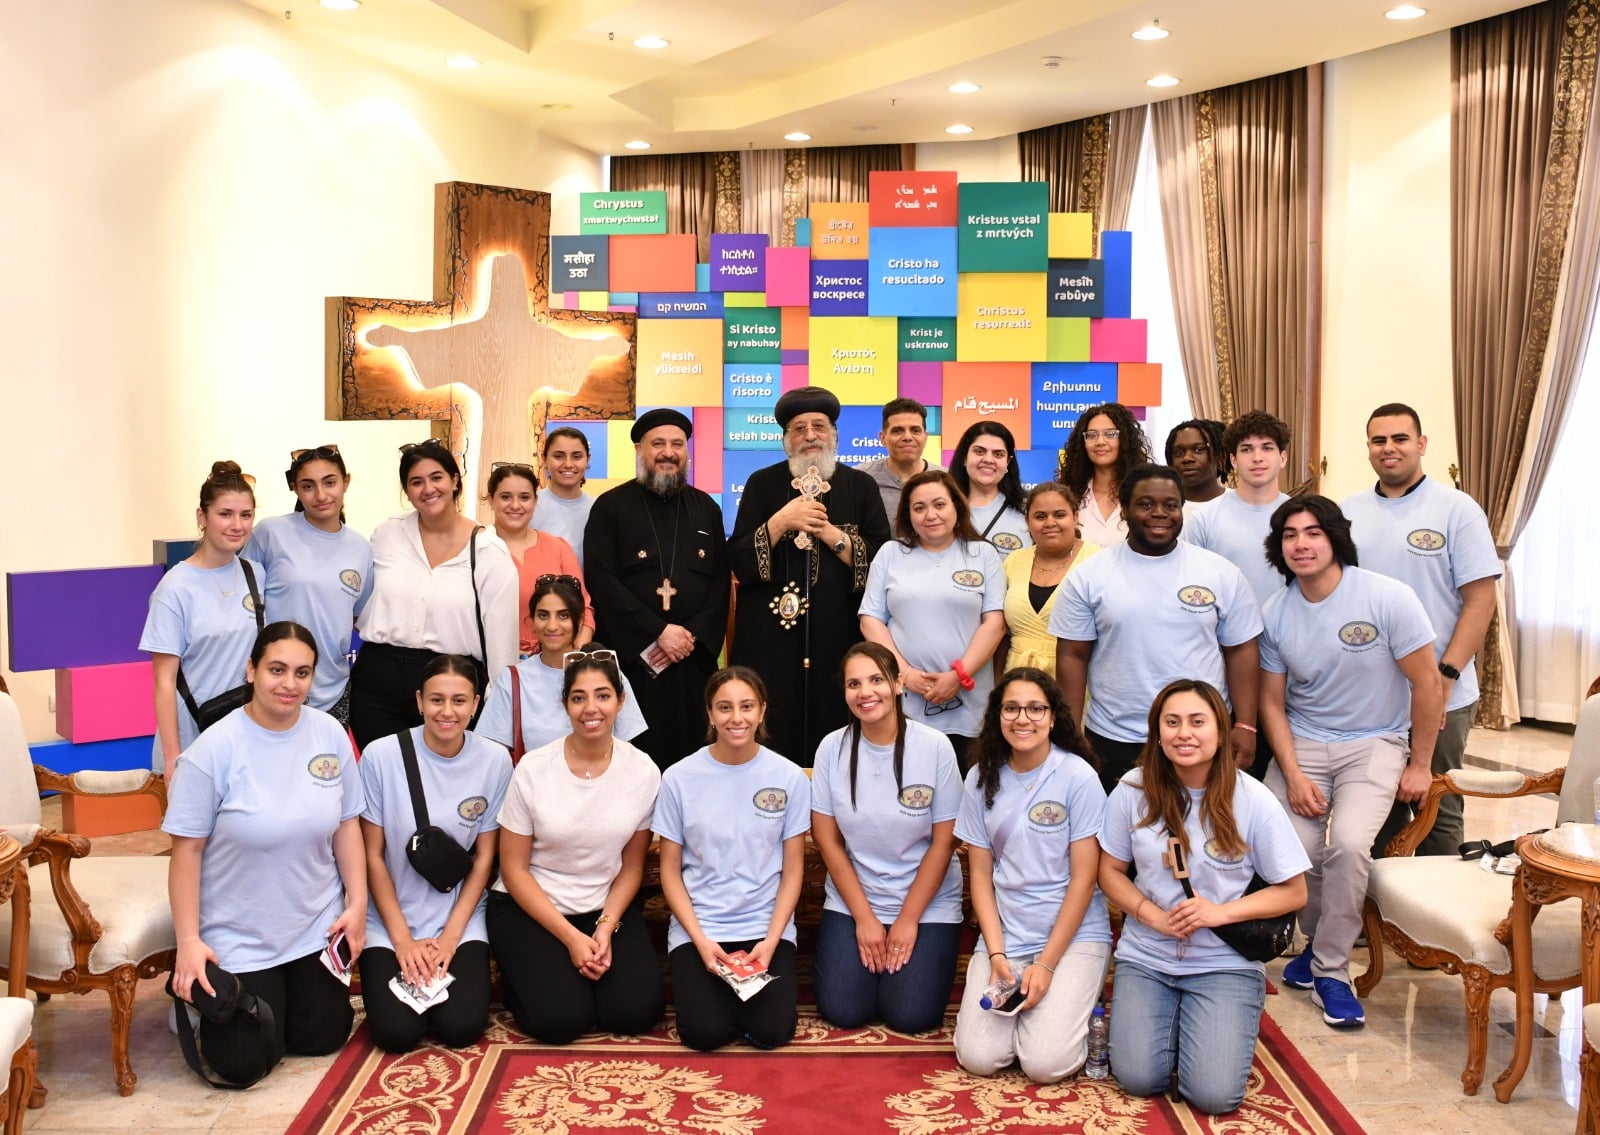 H.H. Pope Tawadros II Receives Youth from the Diocese of Pennsylvania and its affiliated areas